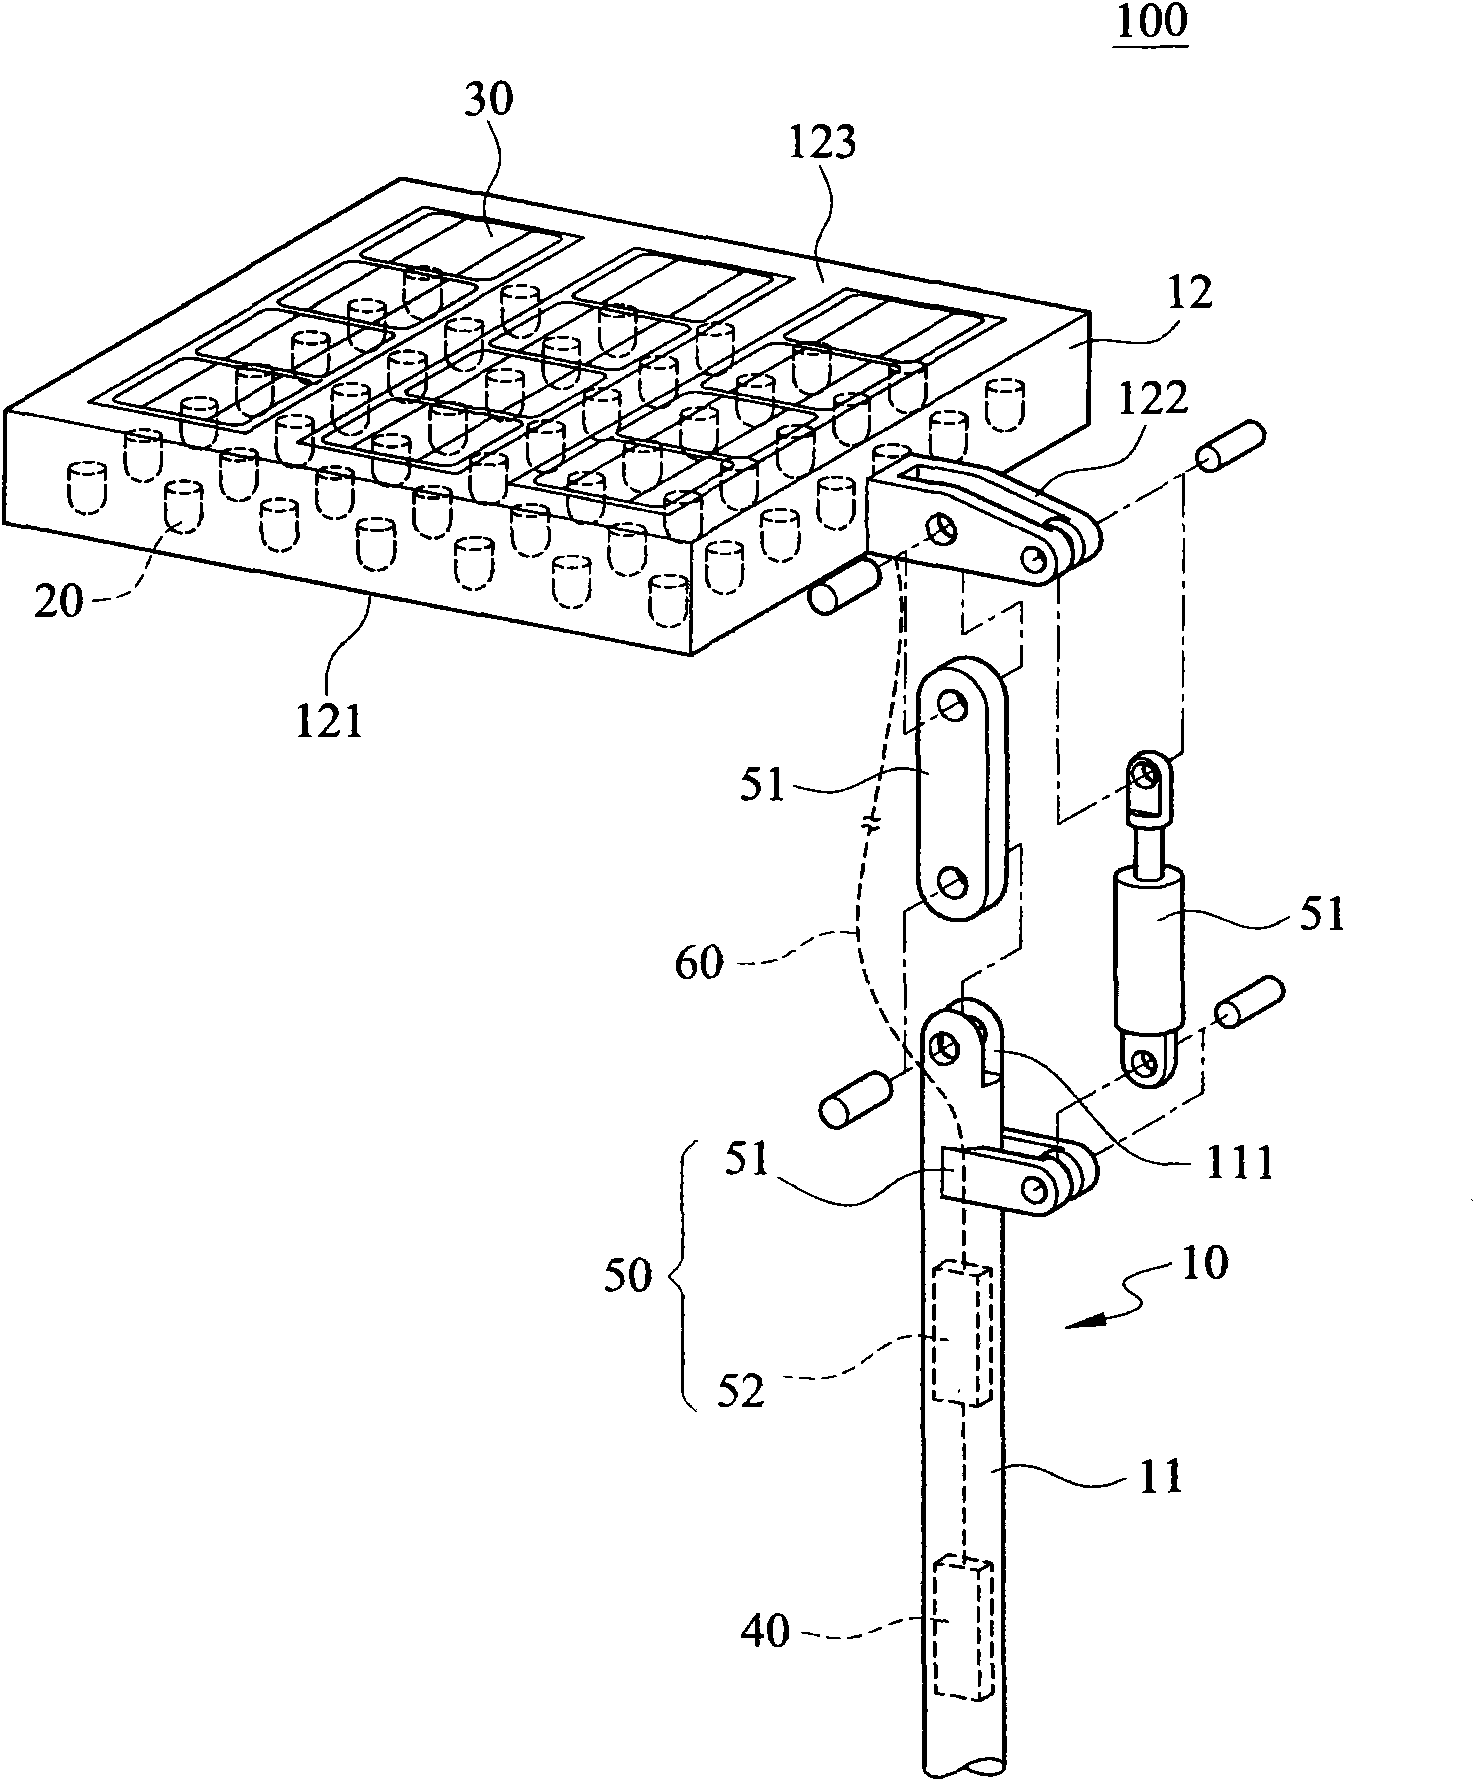 Solar street lamp structure with adjustable angle